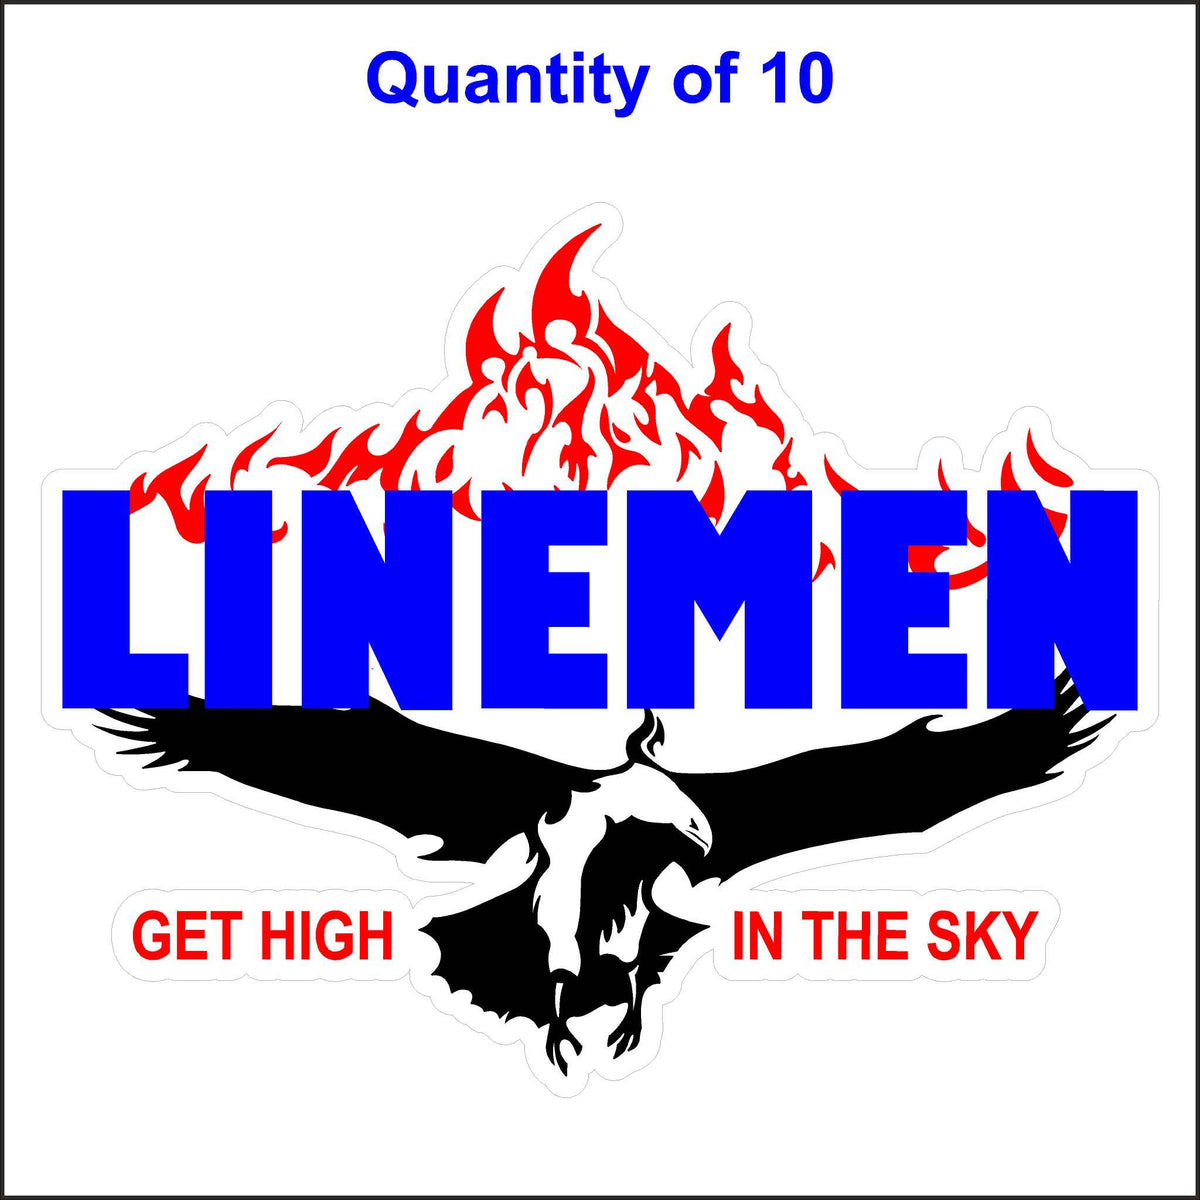 Linemen Get High in the Sky Sticker - Lineman Stickers. 10 Quantity.